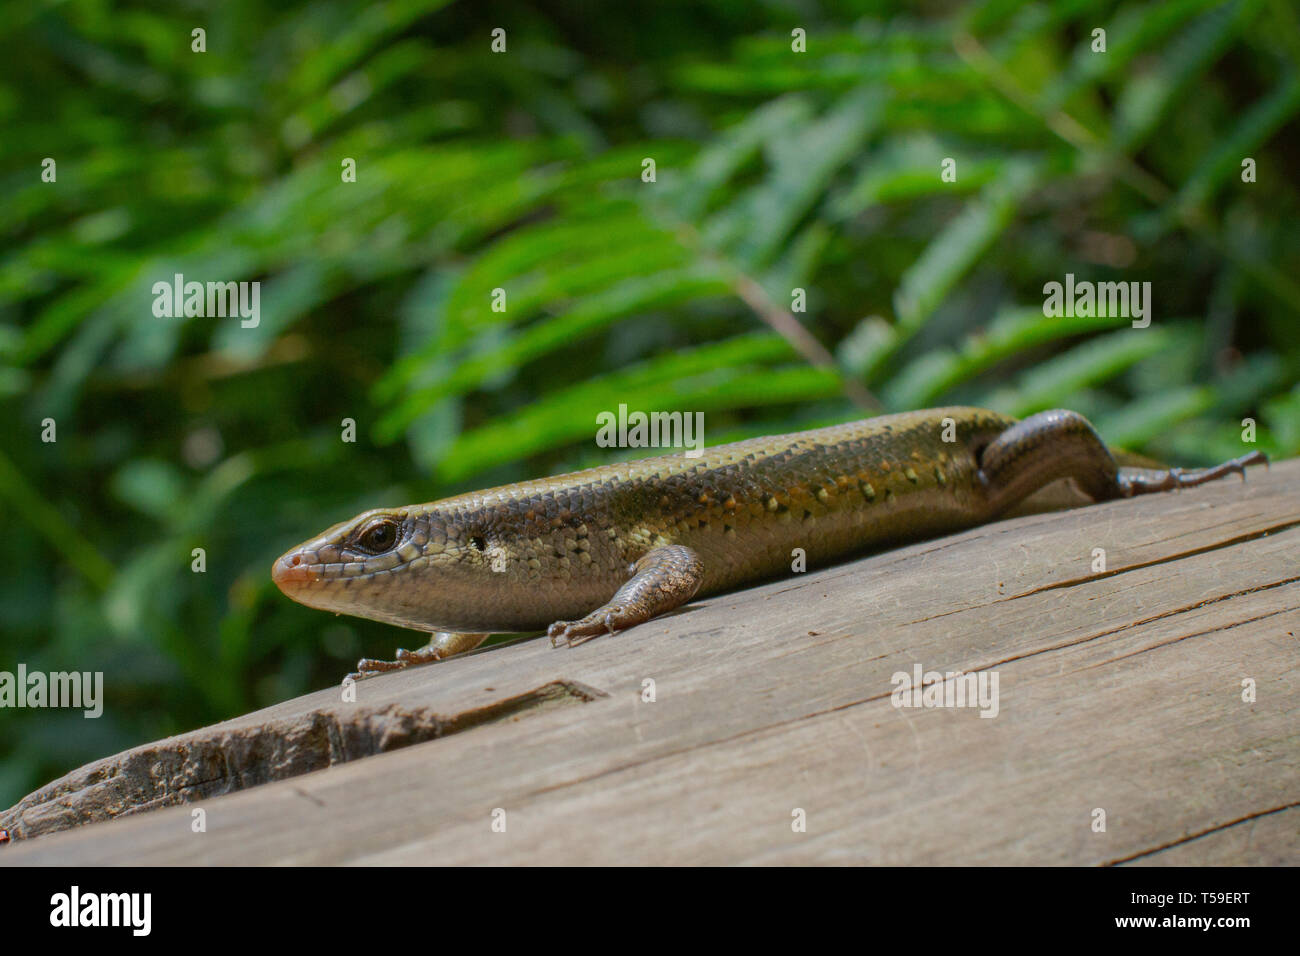 A ground skink close-up picture Stock Photo